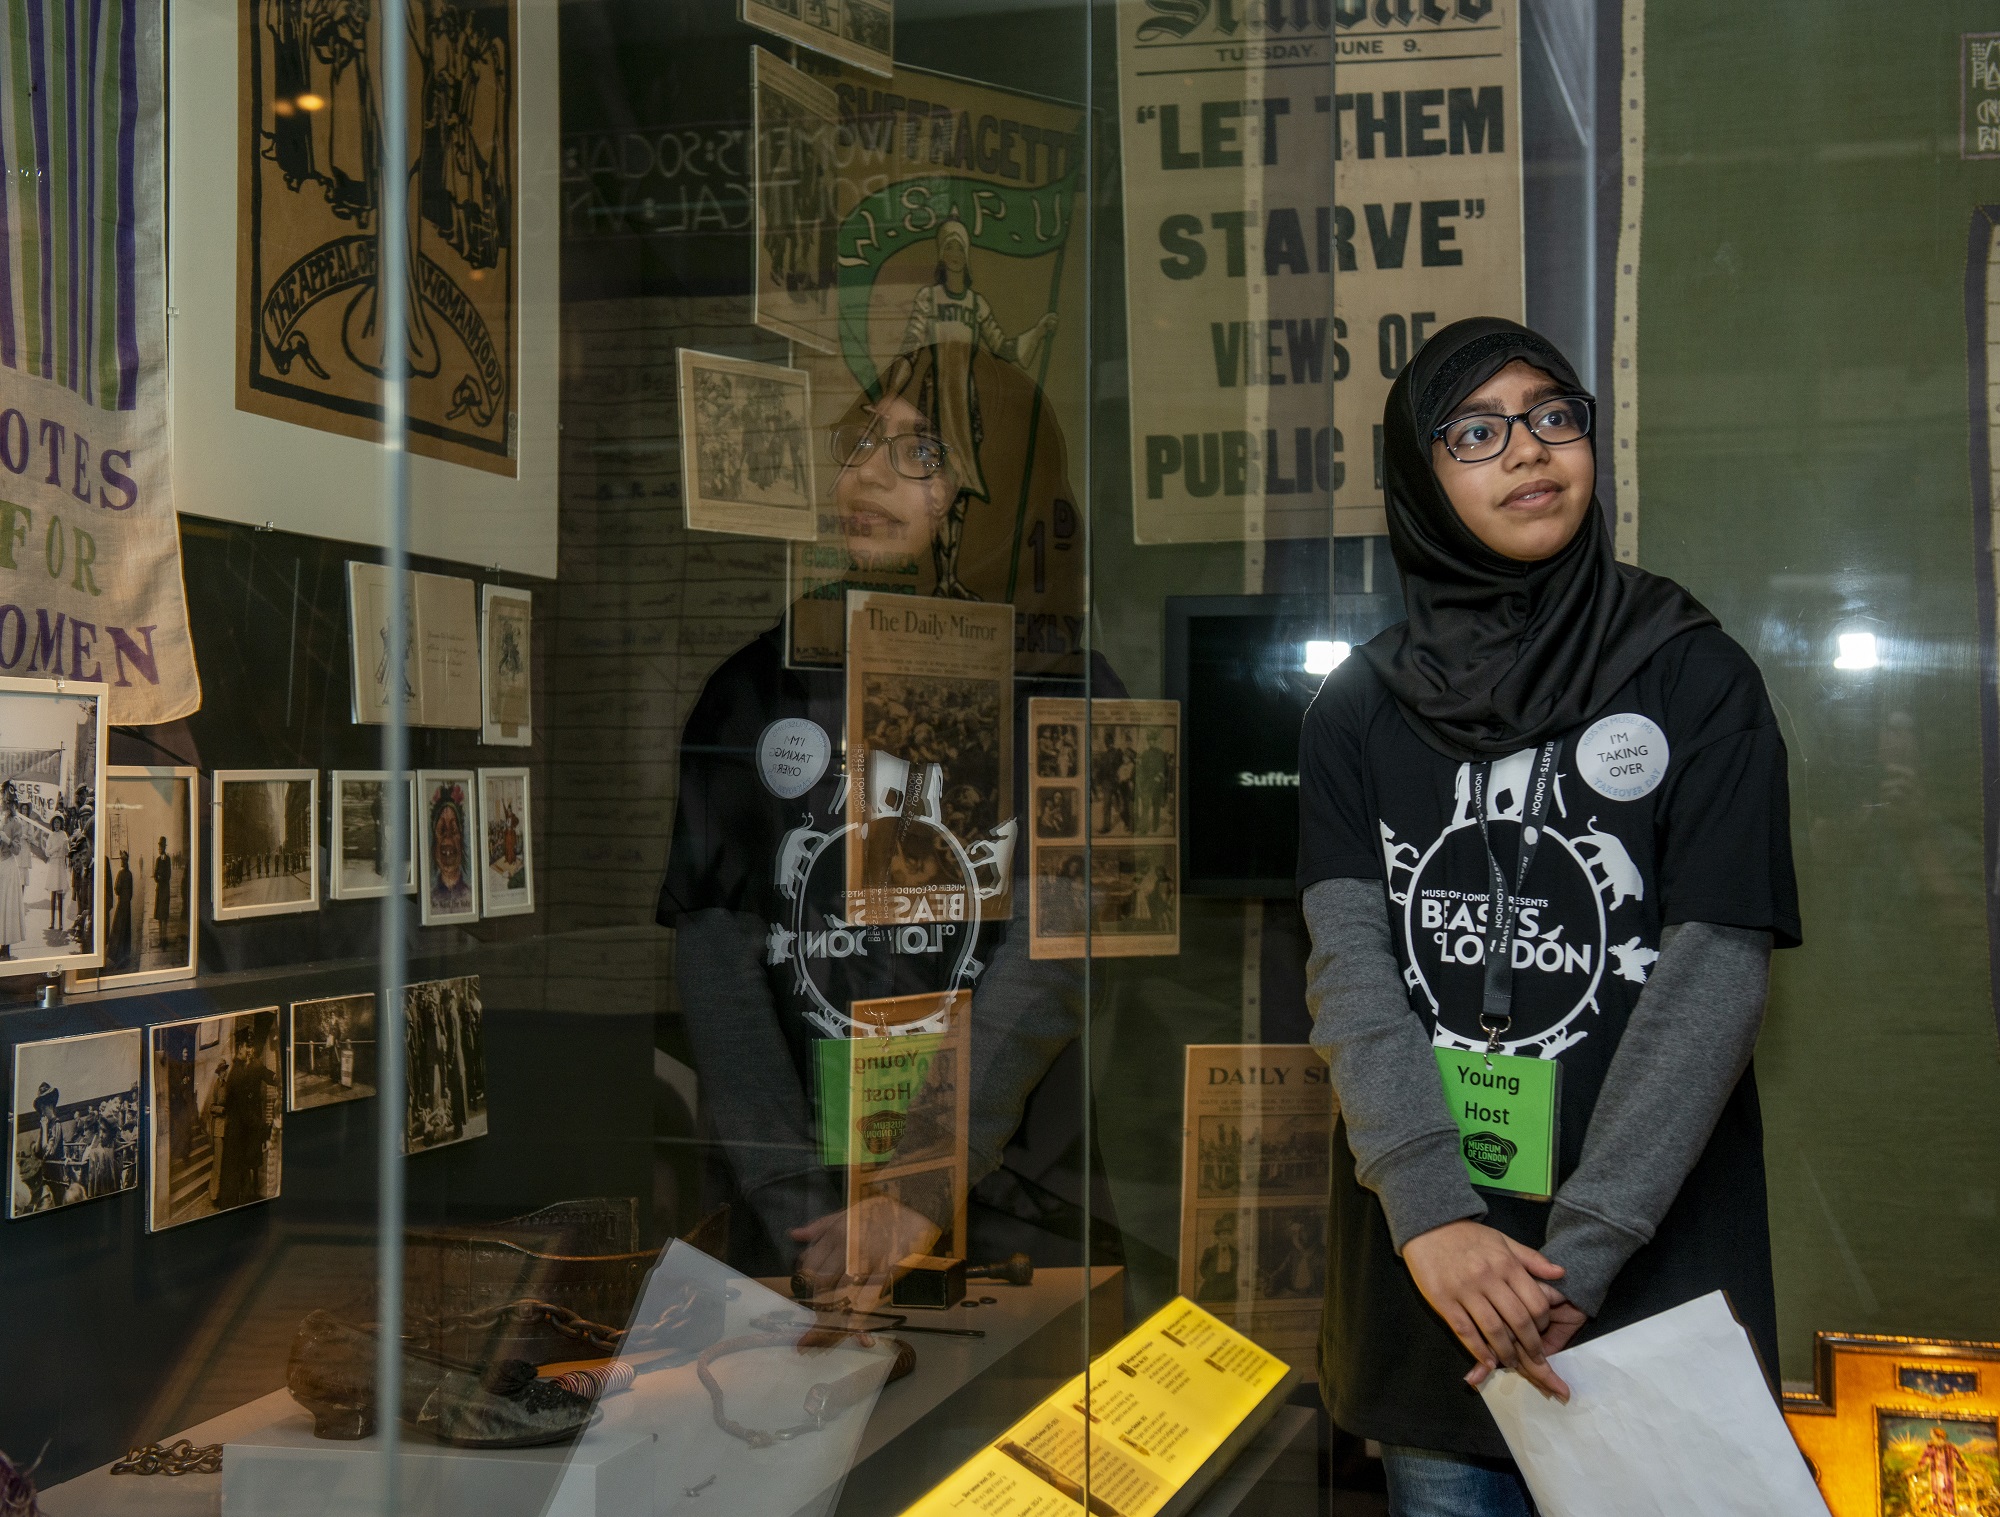 A young woman wearing a badge saying 'Museum Host' and 'I'm taking over' stands in front of a display case at the Museum of London.